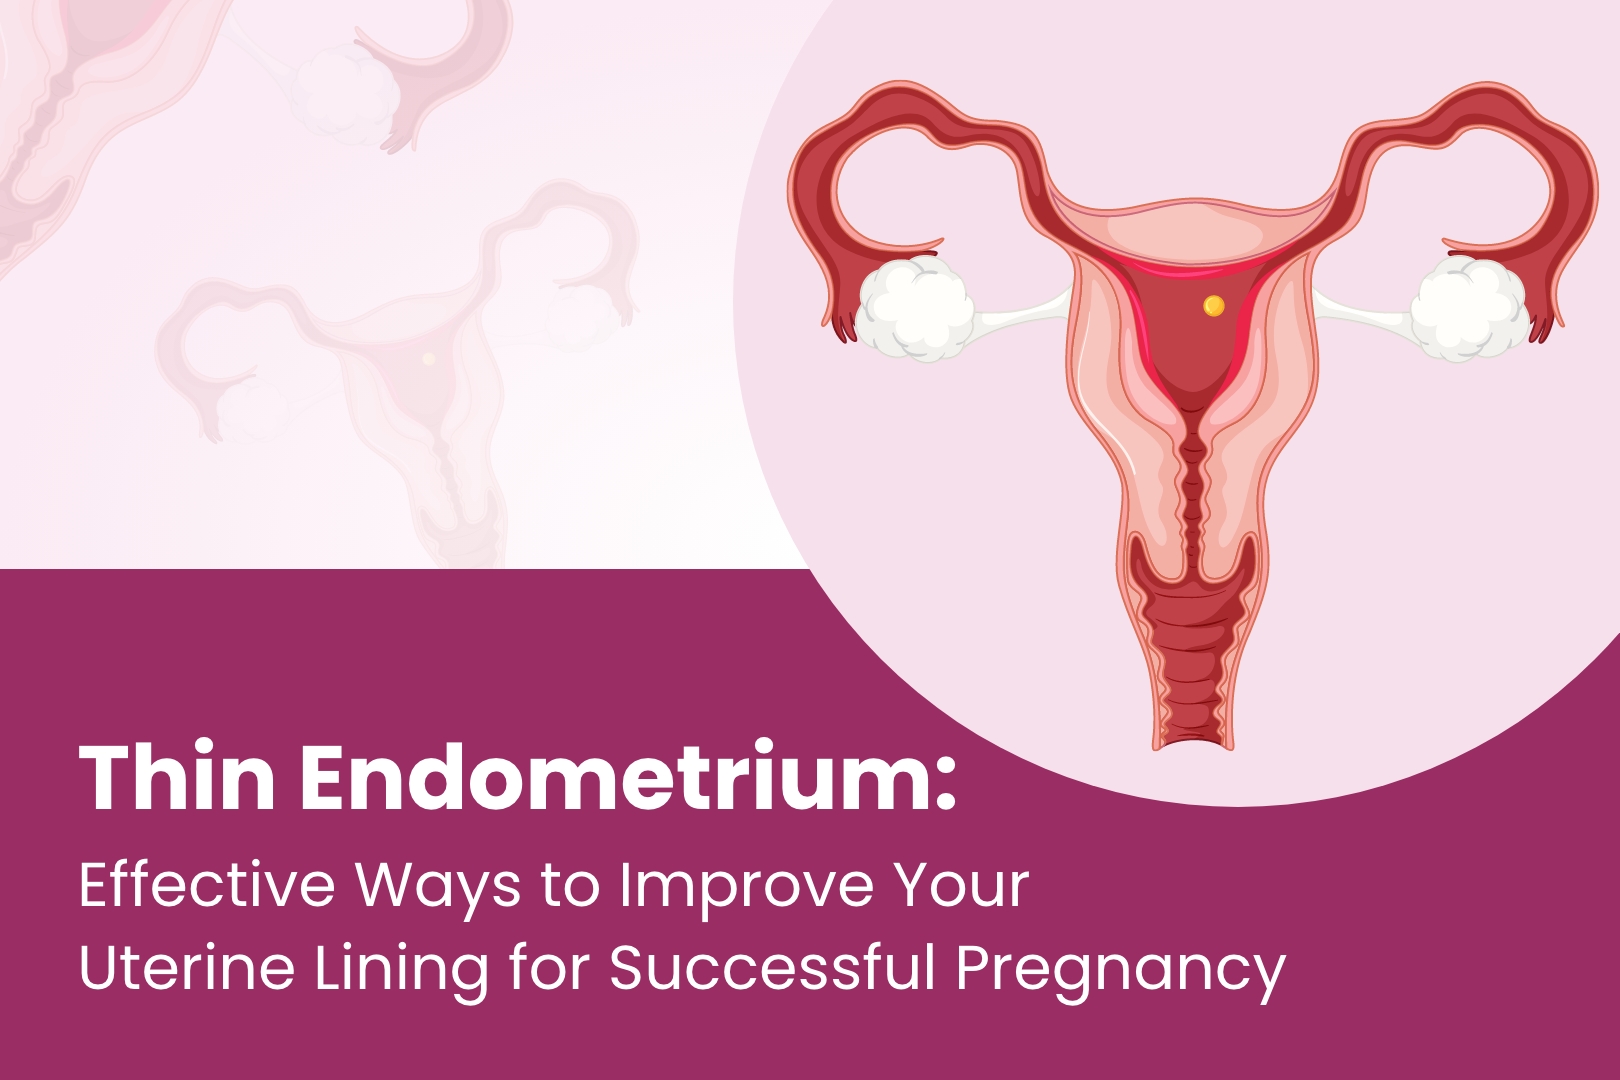 Thin Endometrium: Effective Ways to Improve Your Uterine Lining for Successful Pregnancy